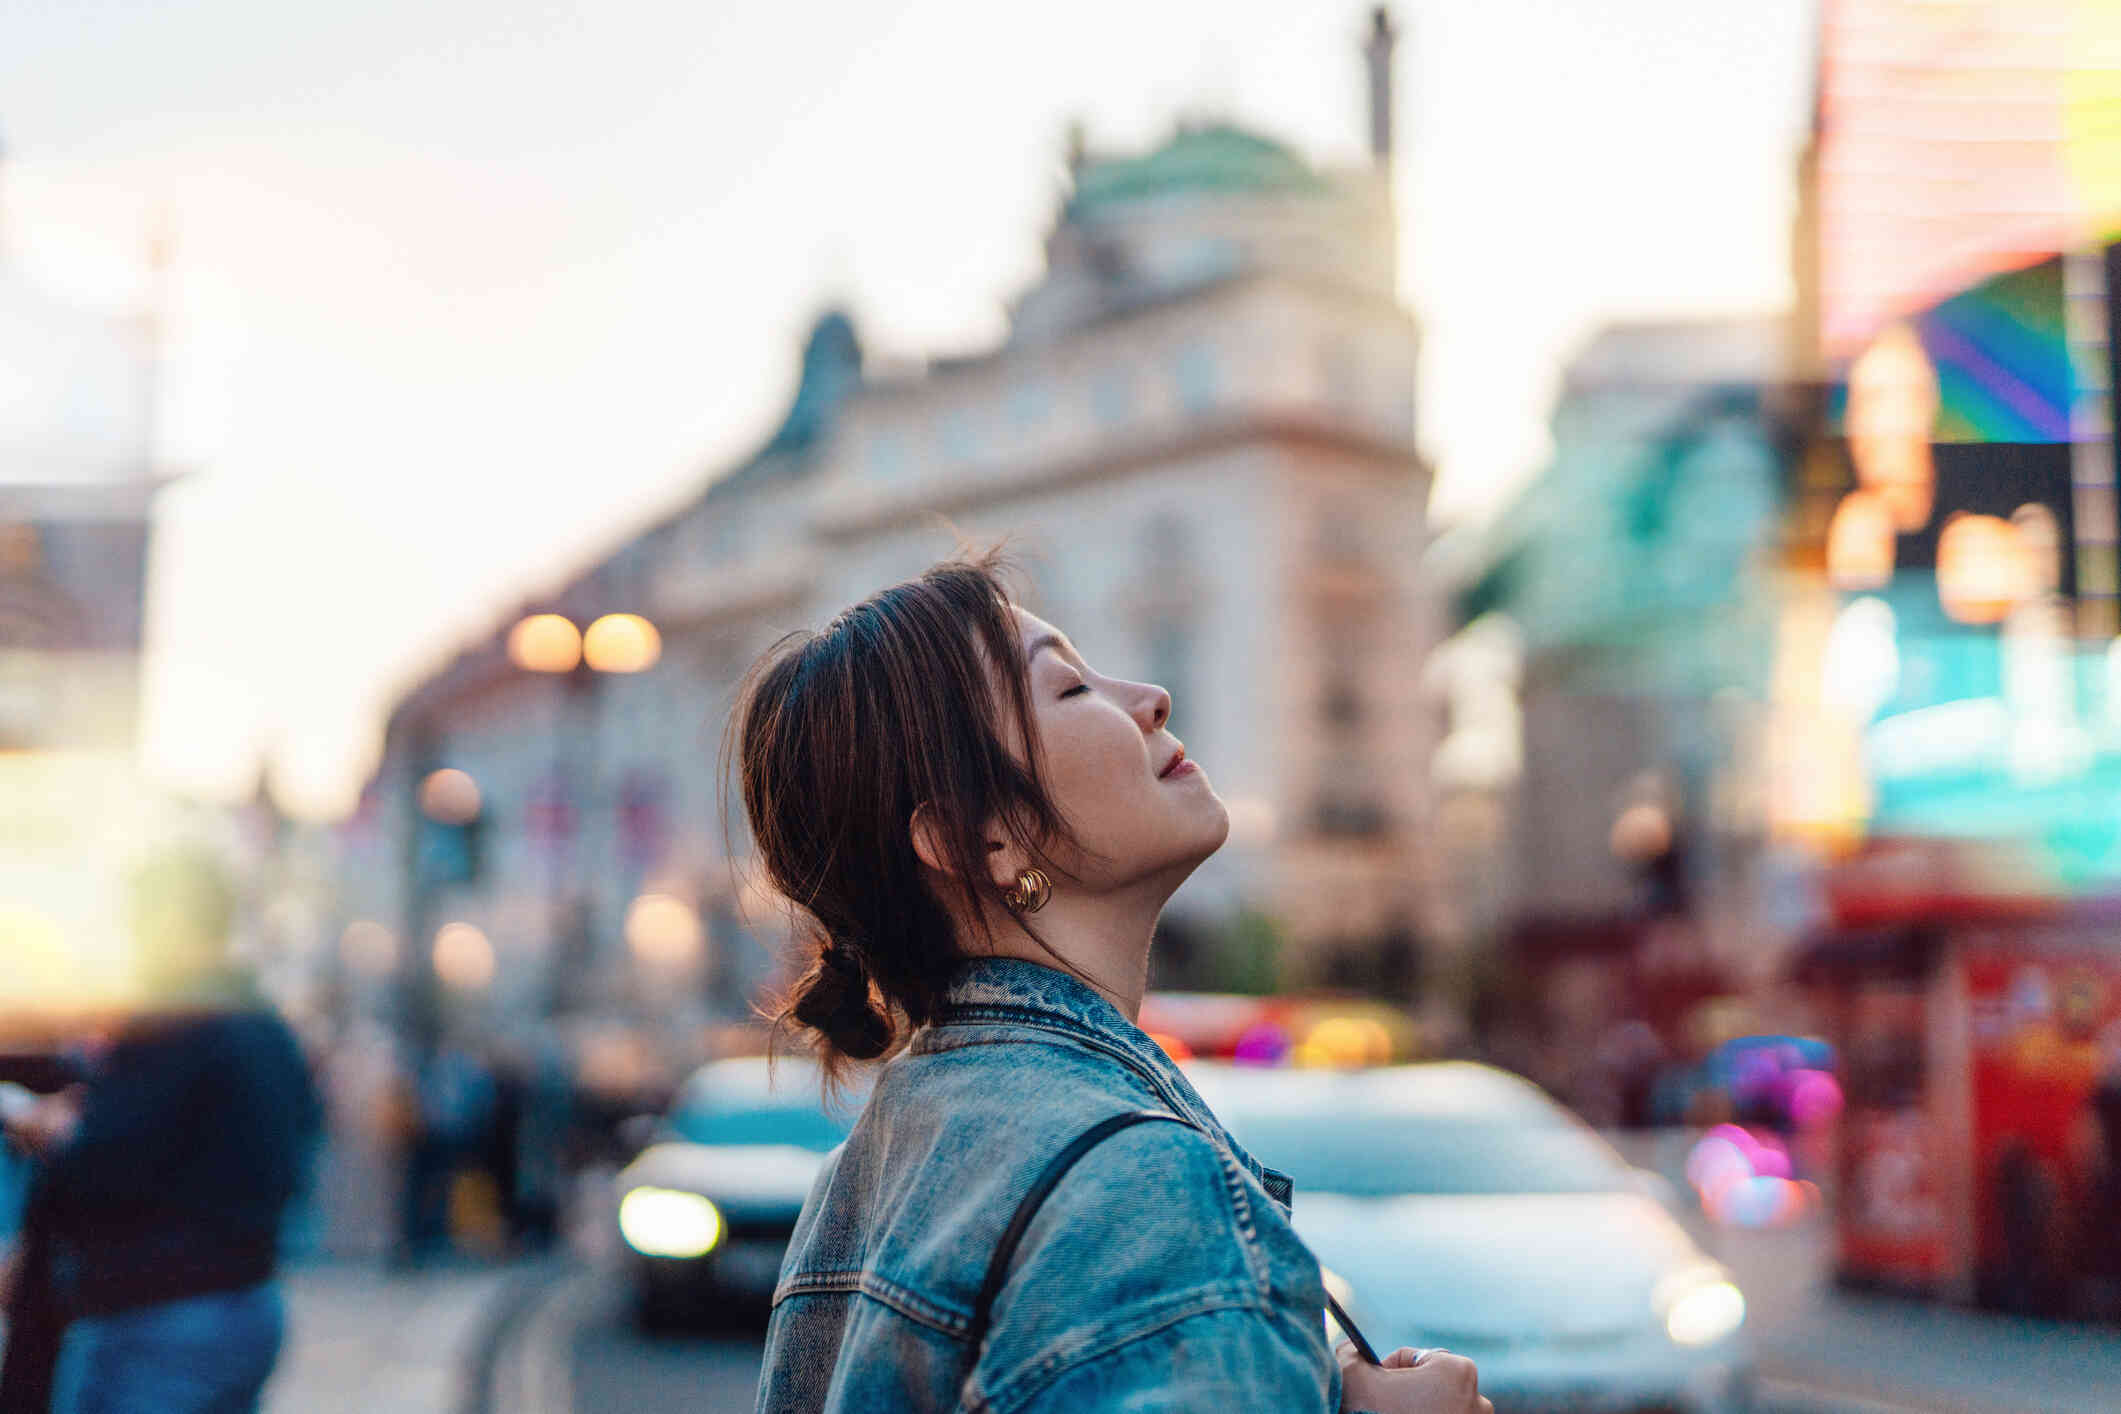 A woman stands outside near traffic in a busy city and closes her eyes while lifting her head up.